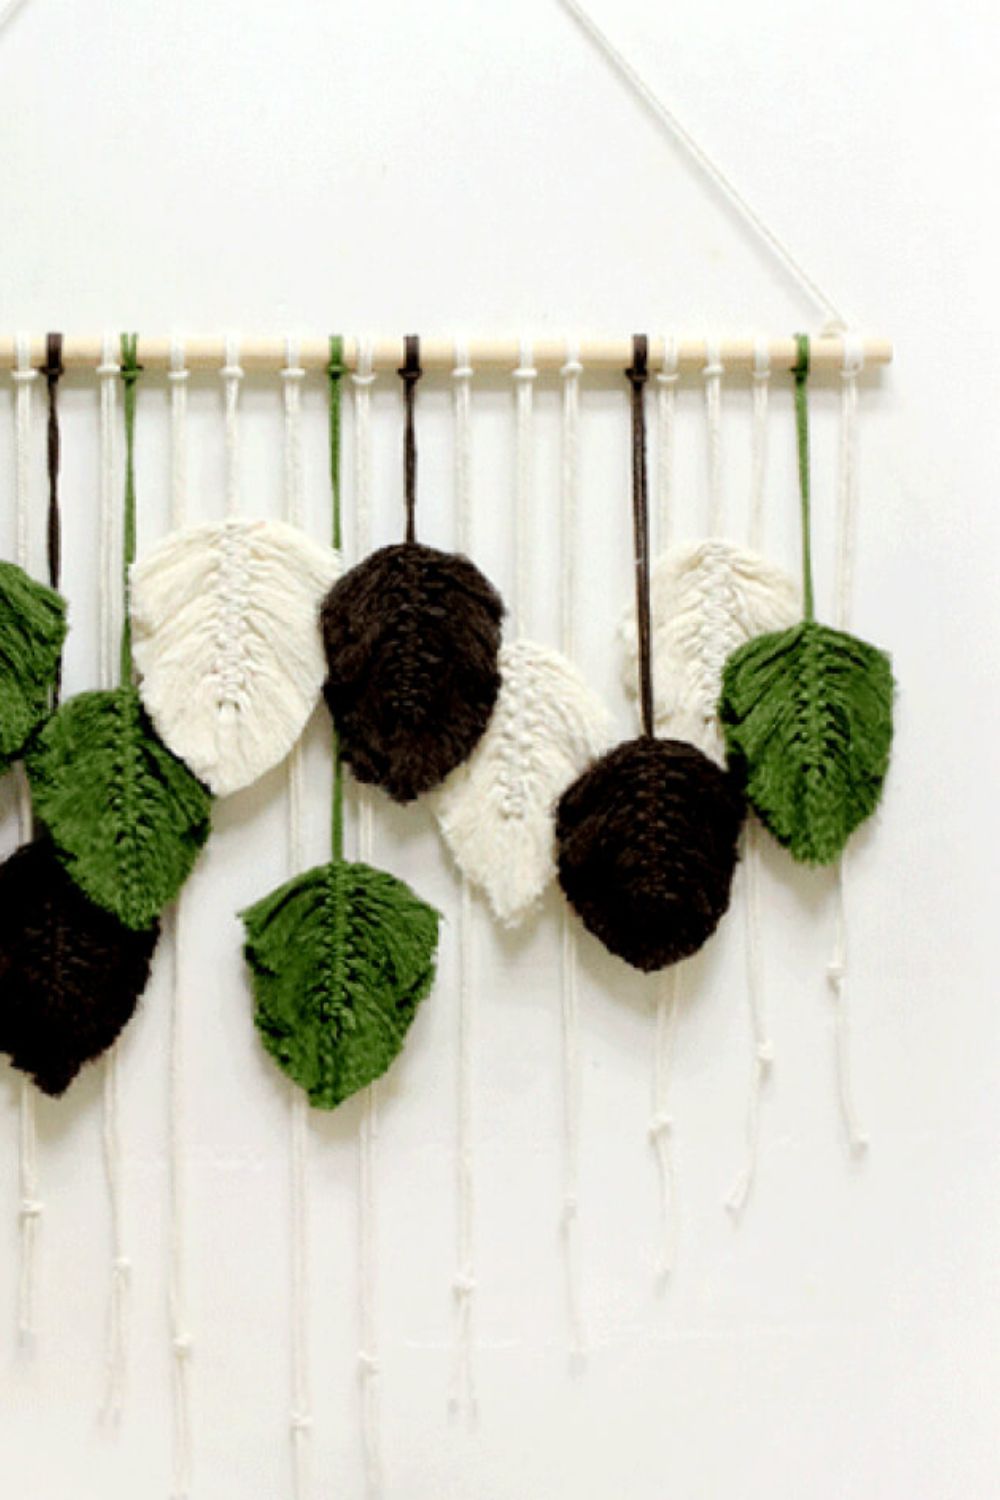 Hand-Woven Feather Macrame Wall Hanging